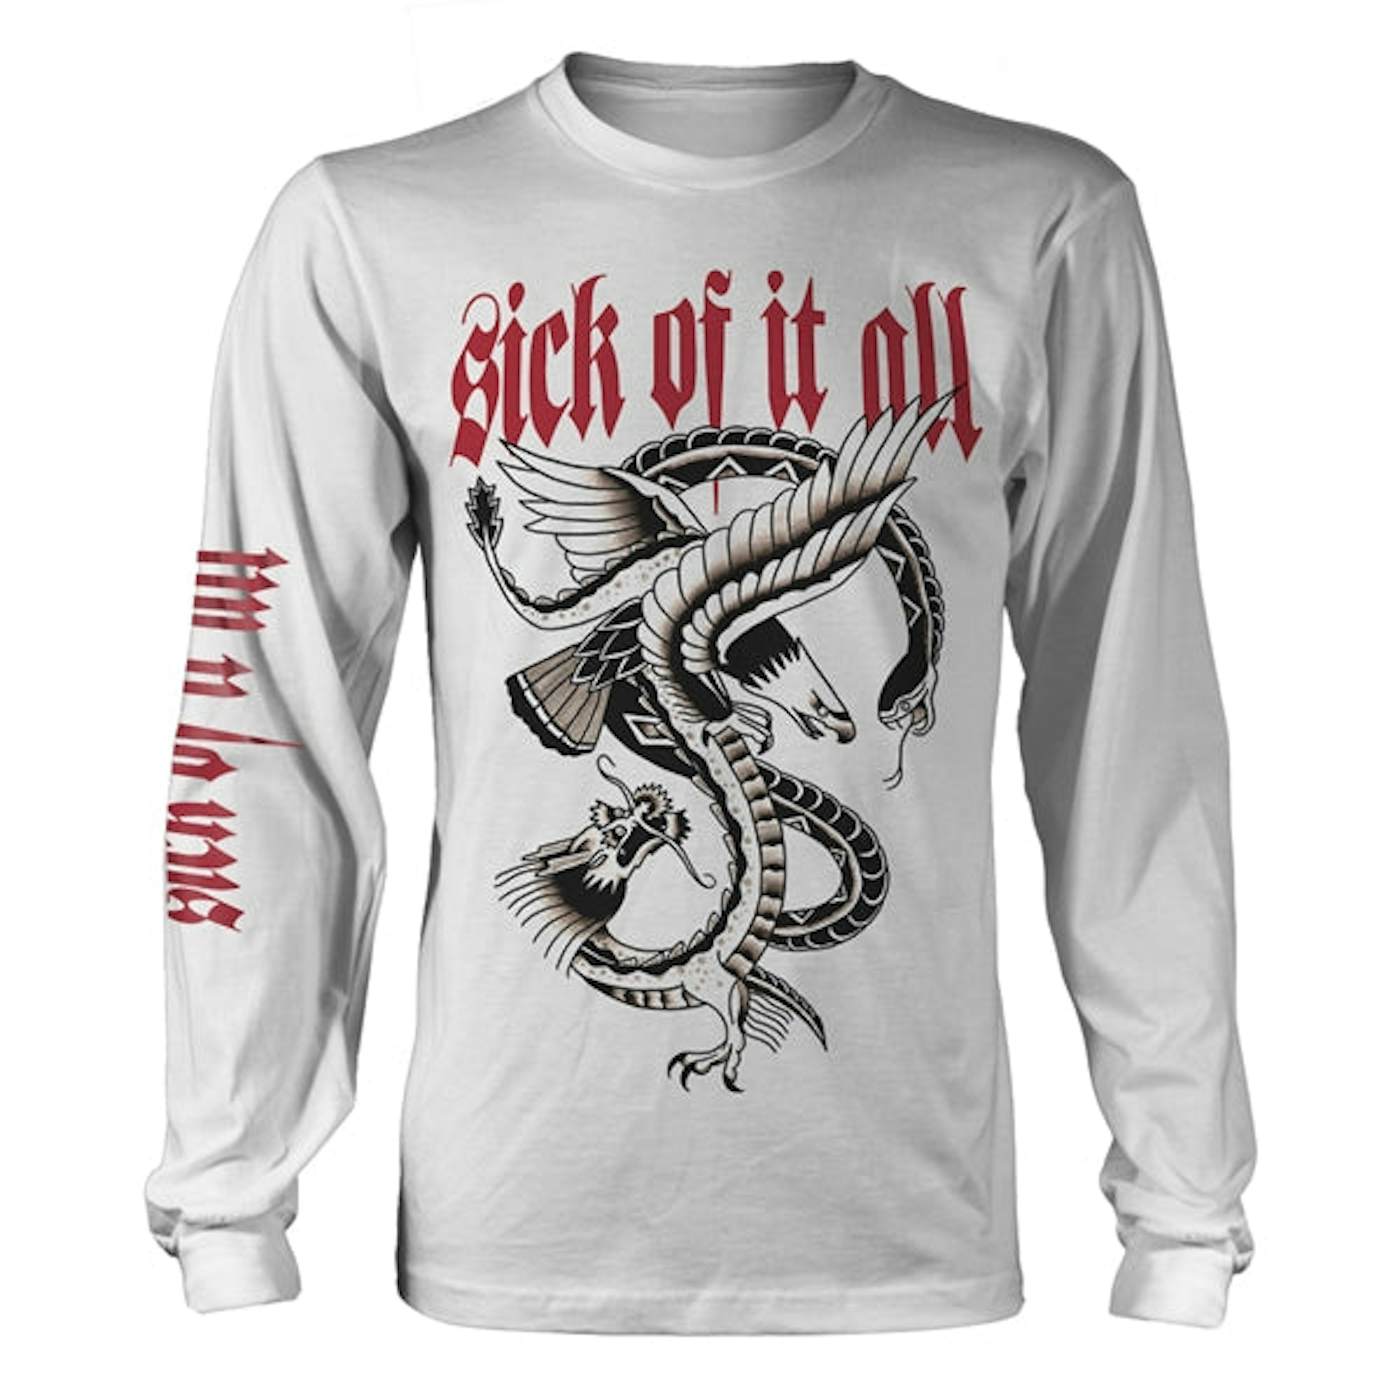 Sick Of It All Long Sleeve T Shirt - Eagle